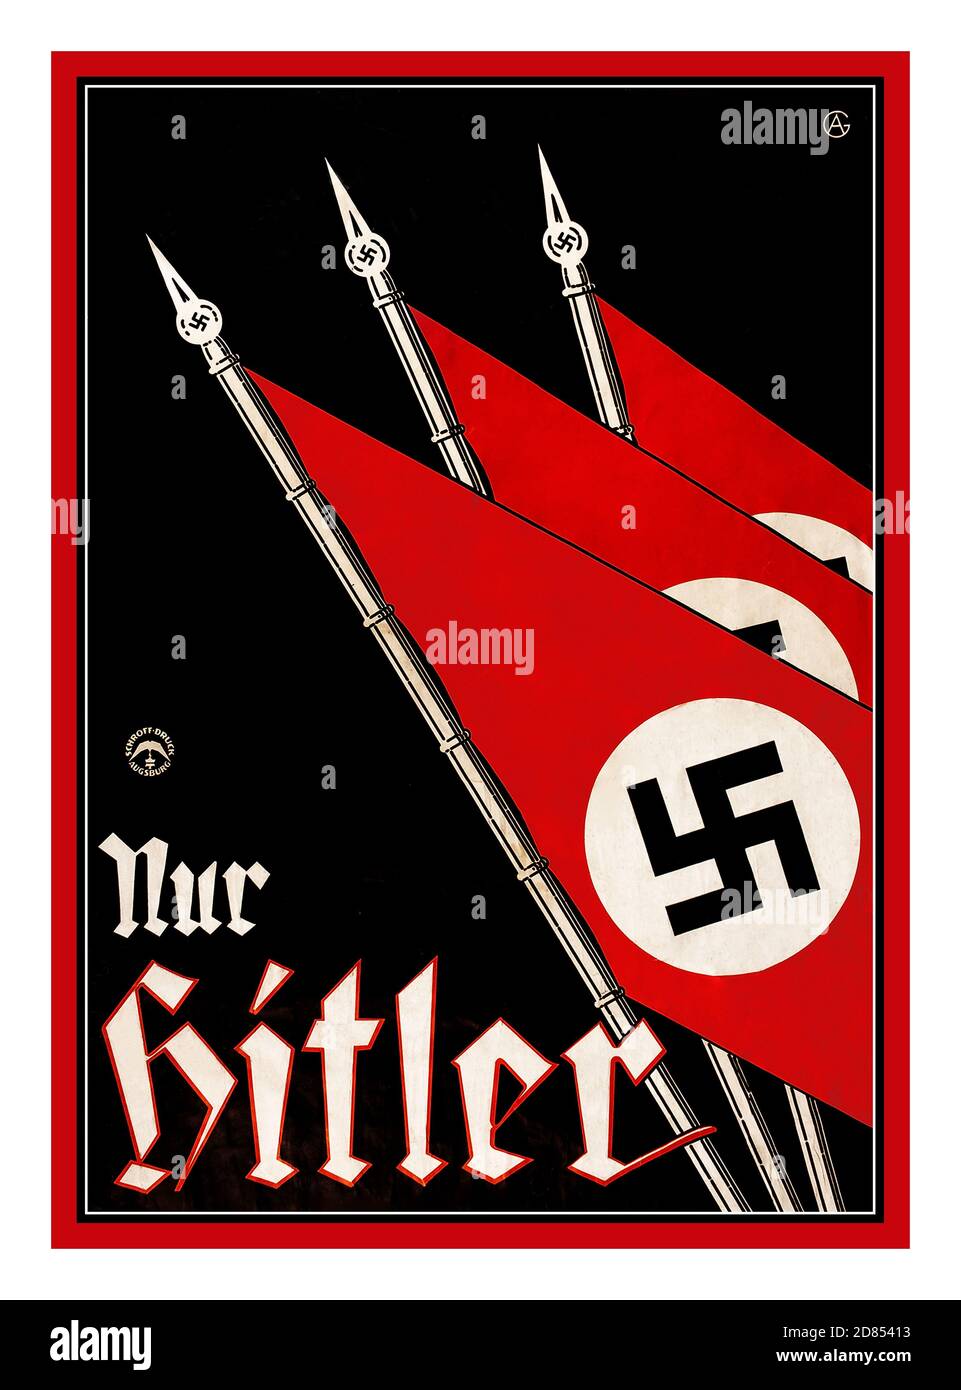 Vintage 1930's 'Only Hitler” nur HITLER Propaganda Poster Lithograph with Swastika Flags. NSDAP Nazi Presidential Election c.1932 Germany. The National Socialist German Workers Party (NSDAP) was founded in 1920s. The ideology relied  on German nationalism and anti-Semitism. By 1921, Adolf Hitler became the leader of the NSDAP, a position which would later propel him to become dictator of the Nazi Germany German Third Reich. NSDAP populist propaganda symbolism kept in the mind of the German voters. Stock Photo